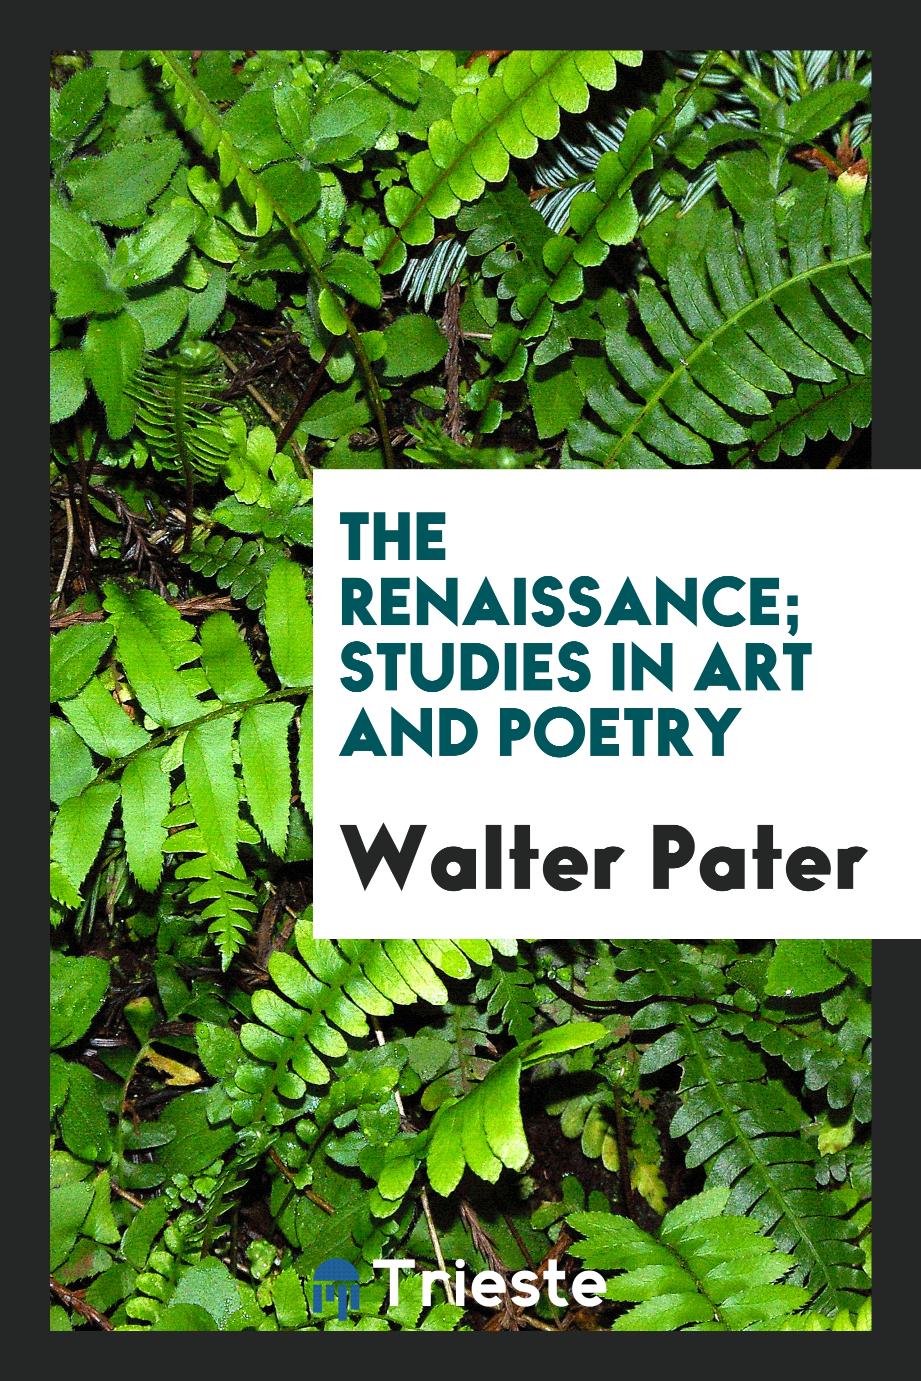 The renaissance; studies in art and poetry